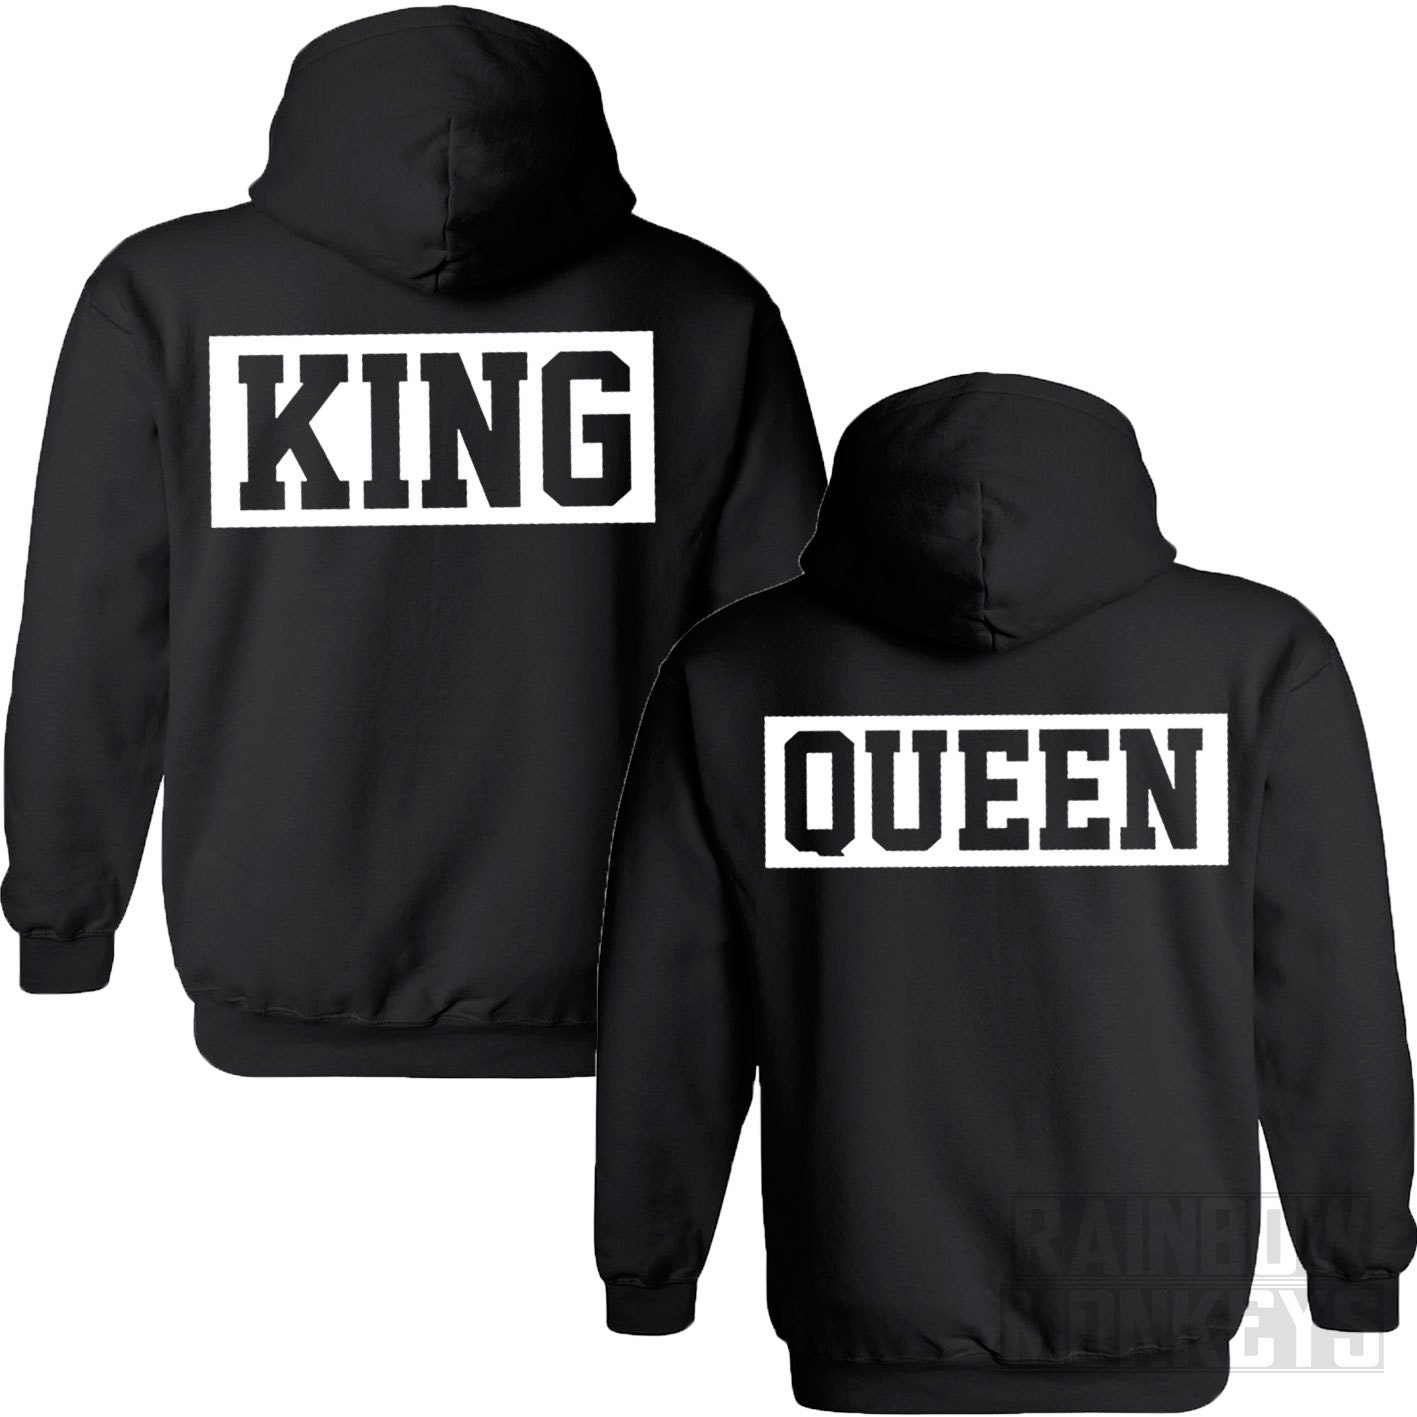 King Queen Hoodies Matching couples Jumpers King and by RMonkeys